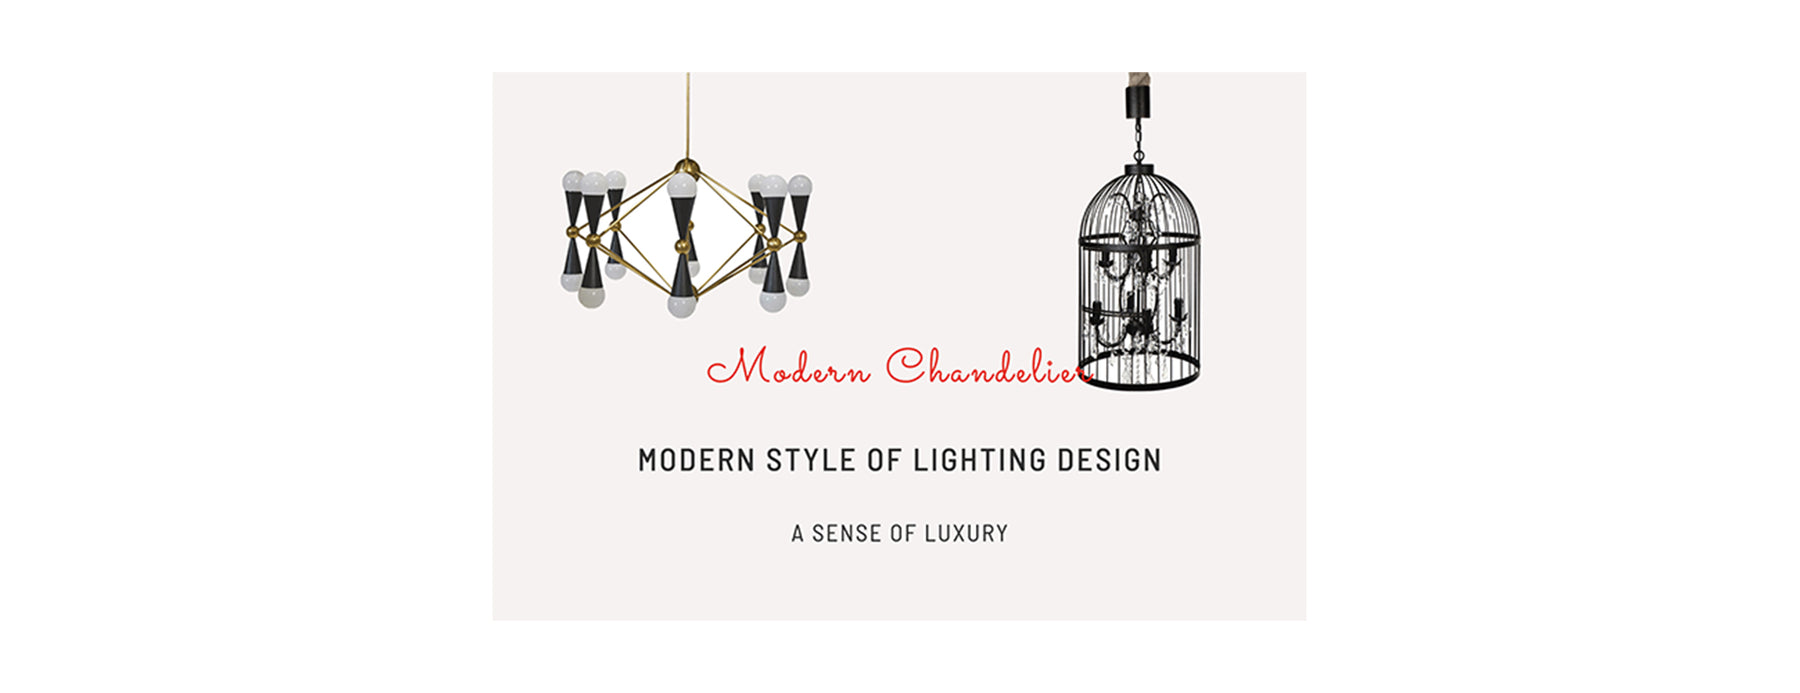 Have You Considered a Chandelier for Your Living Room or Bedroom?